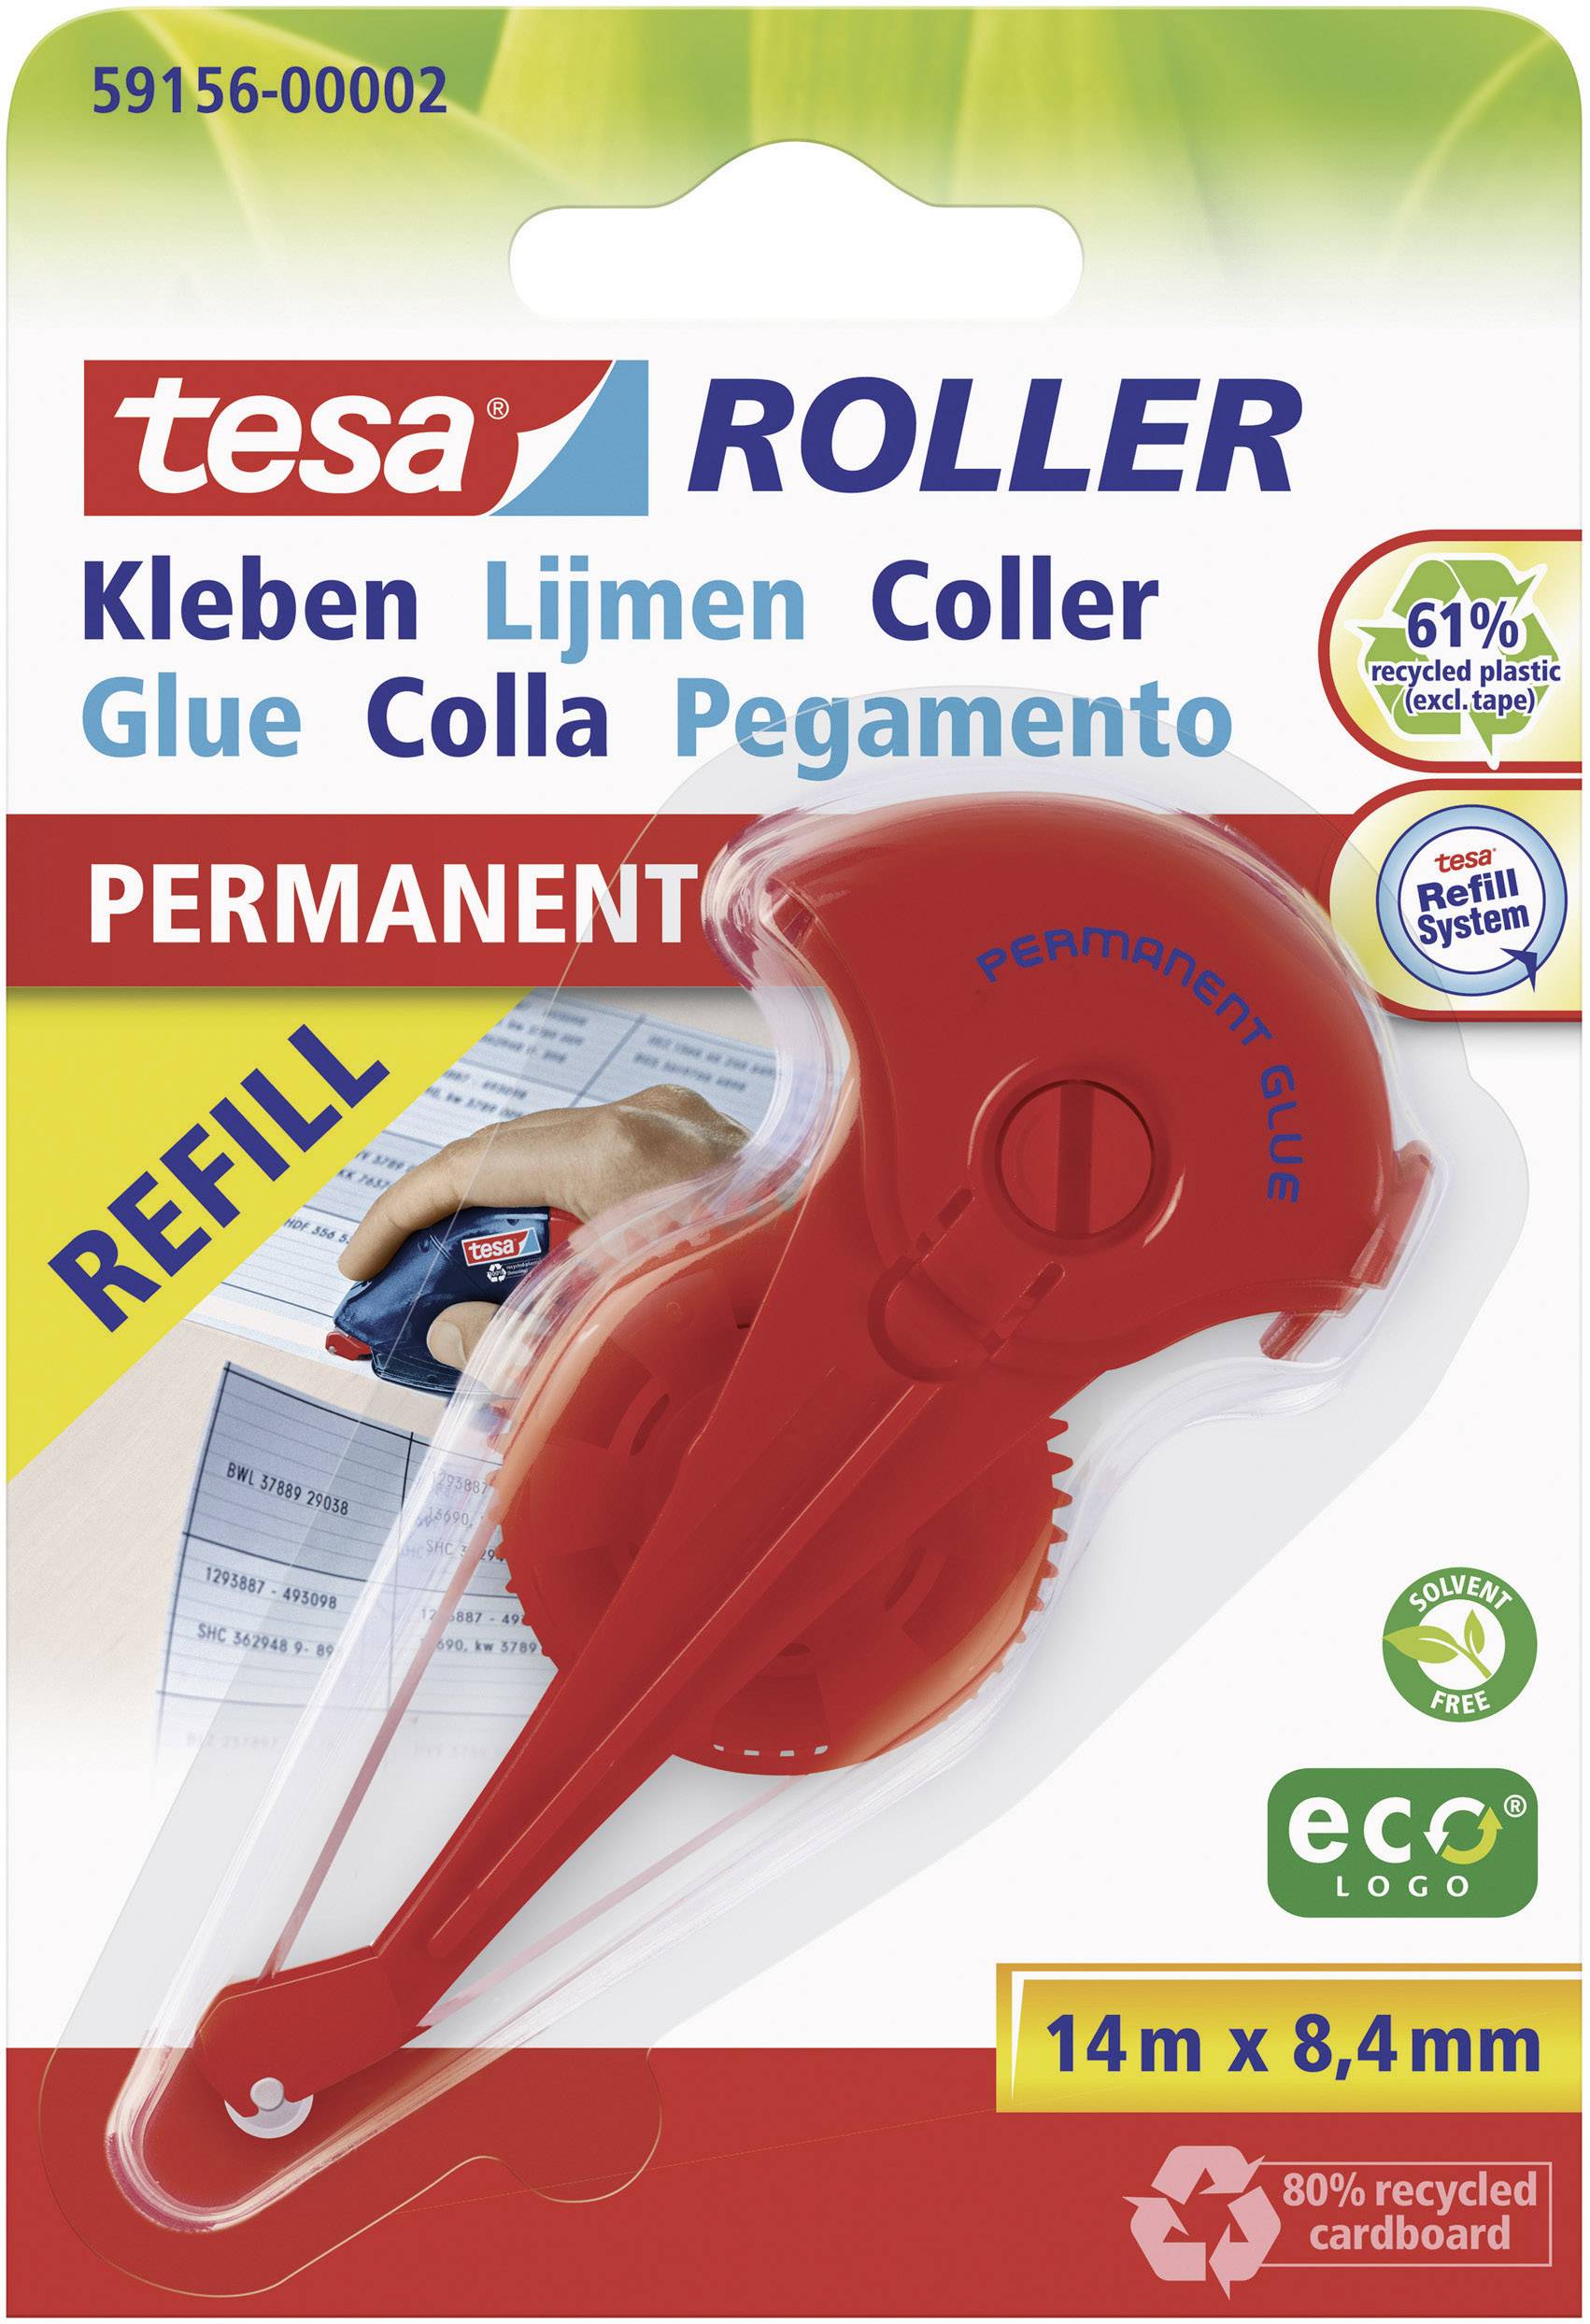 Tesa cylindre/rouleau encollage permanent Ecologo recharge